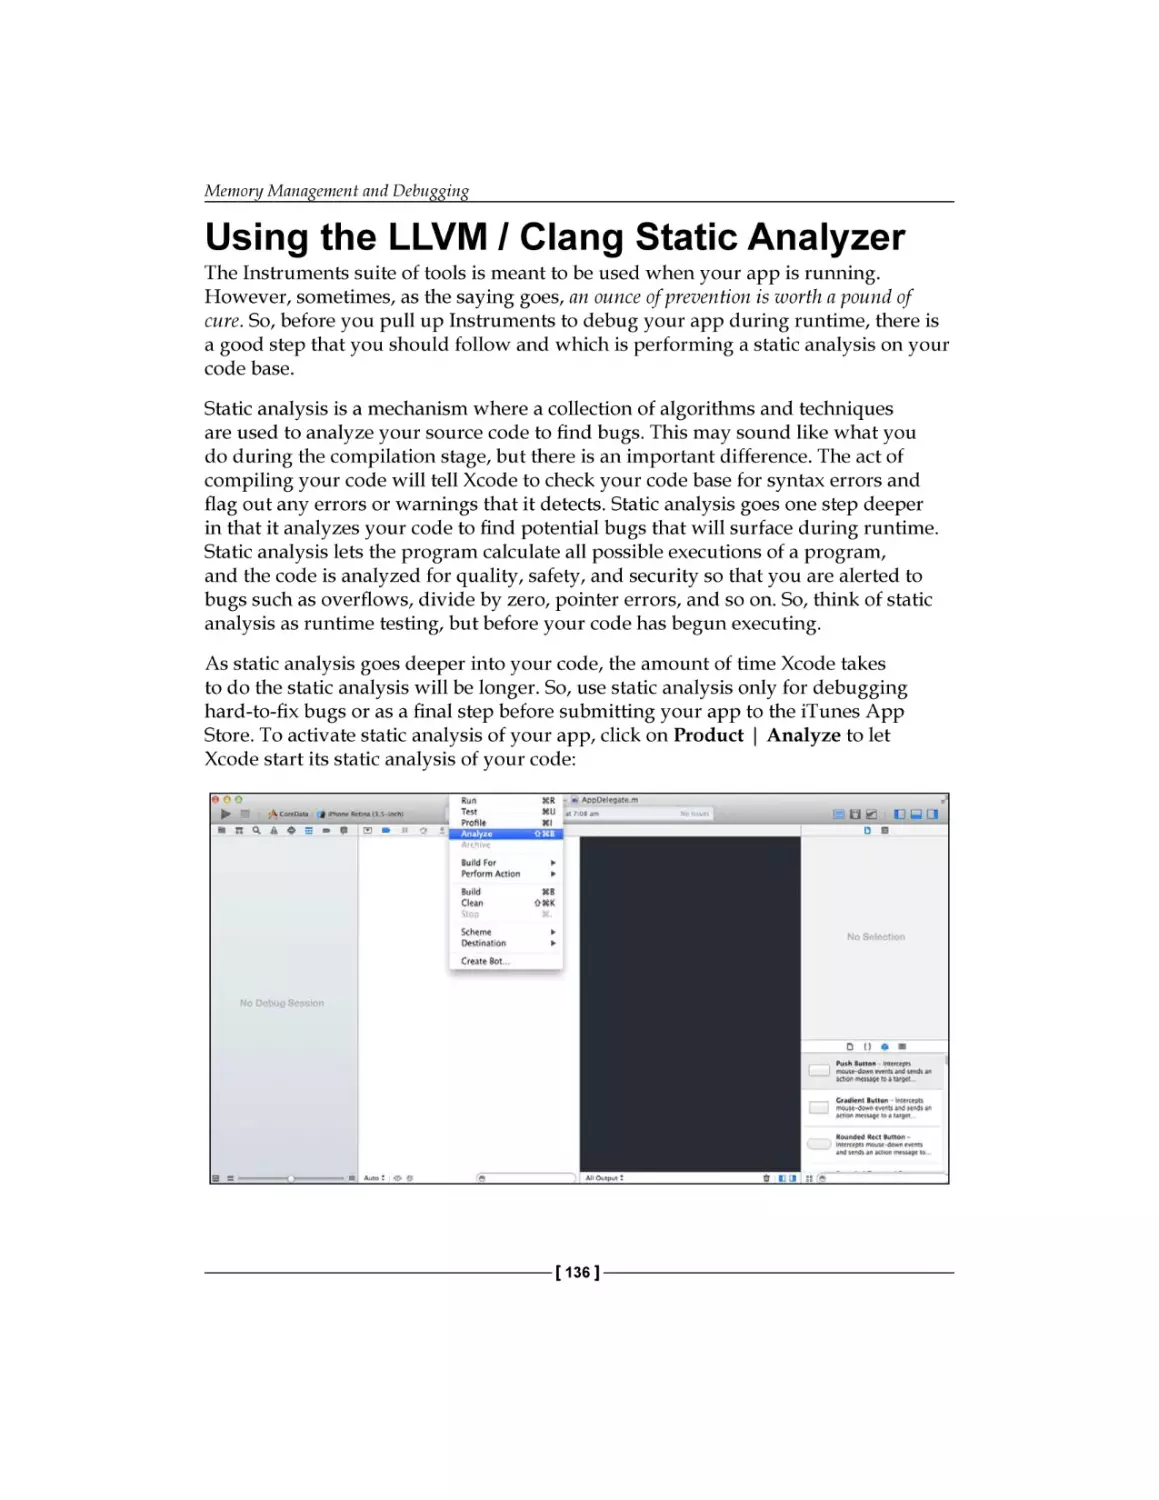 Using the LLVM / Clang Static Analyzer